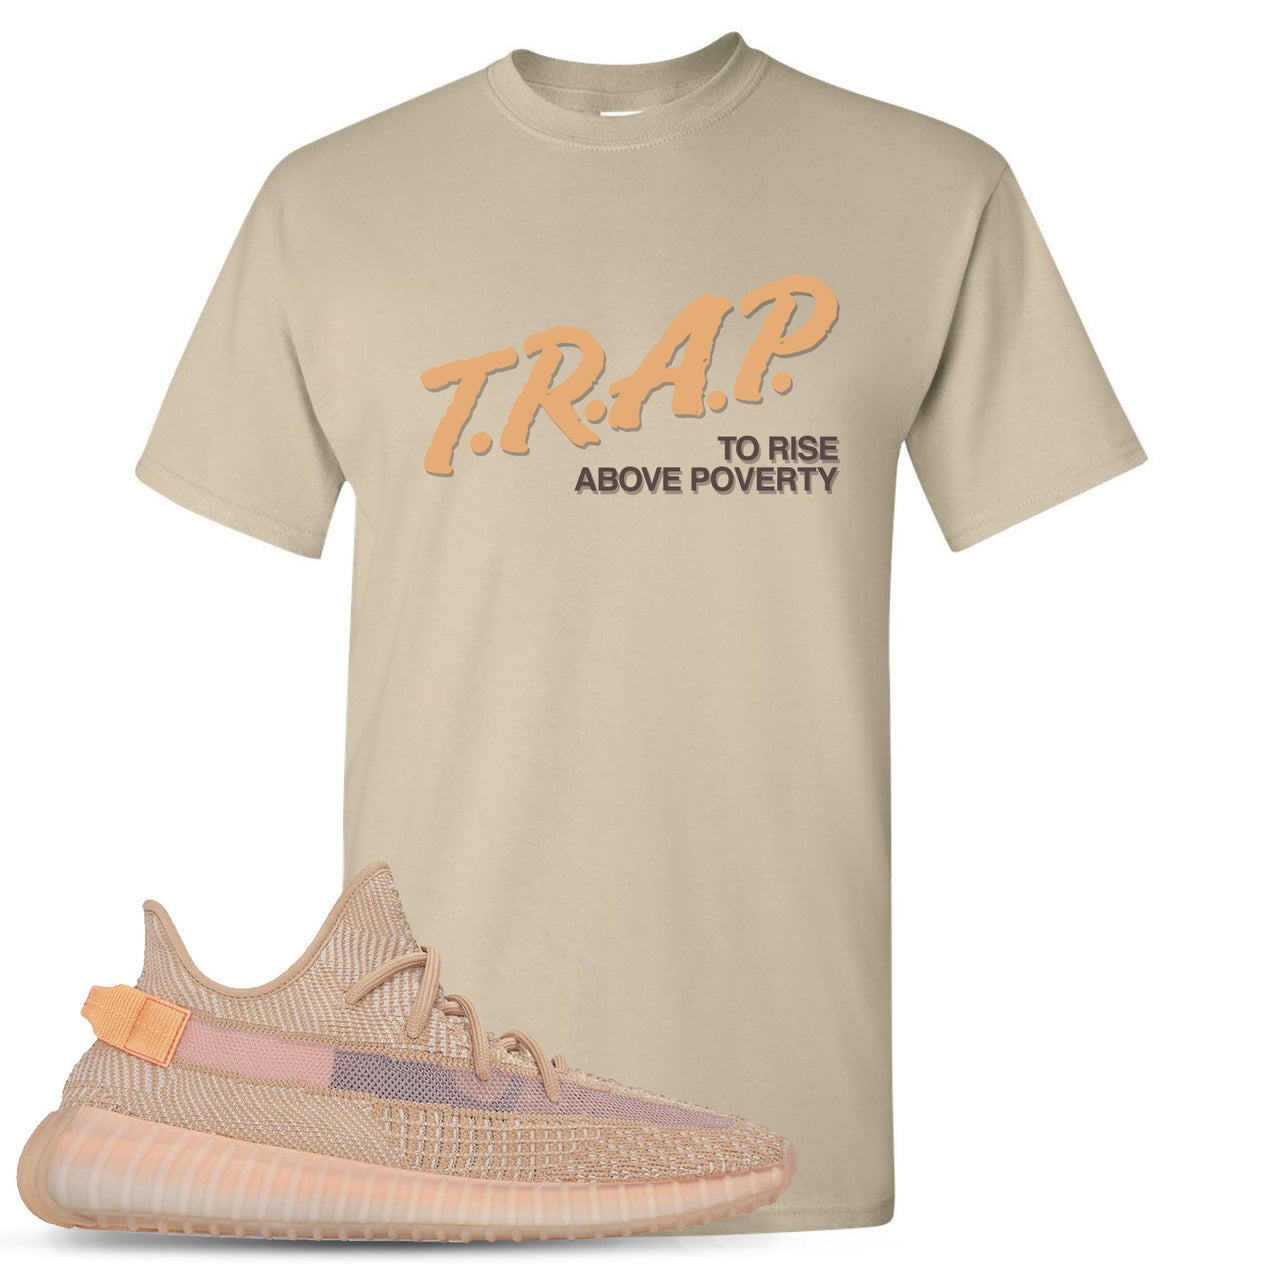 Clay v2 350s T Shirt | Trap To Rise Above Poverty, Sand